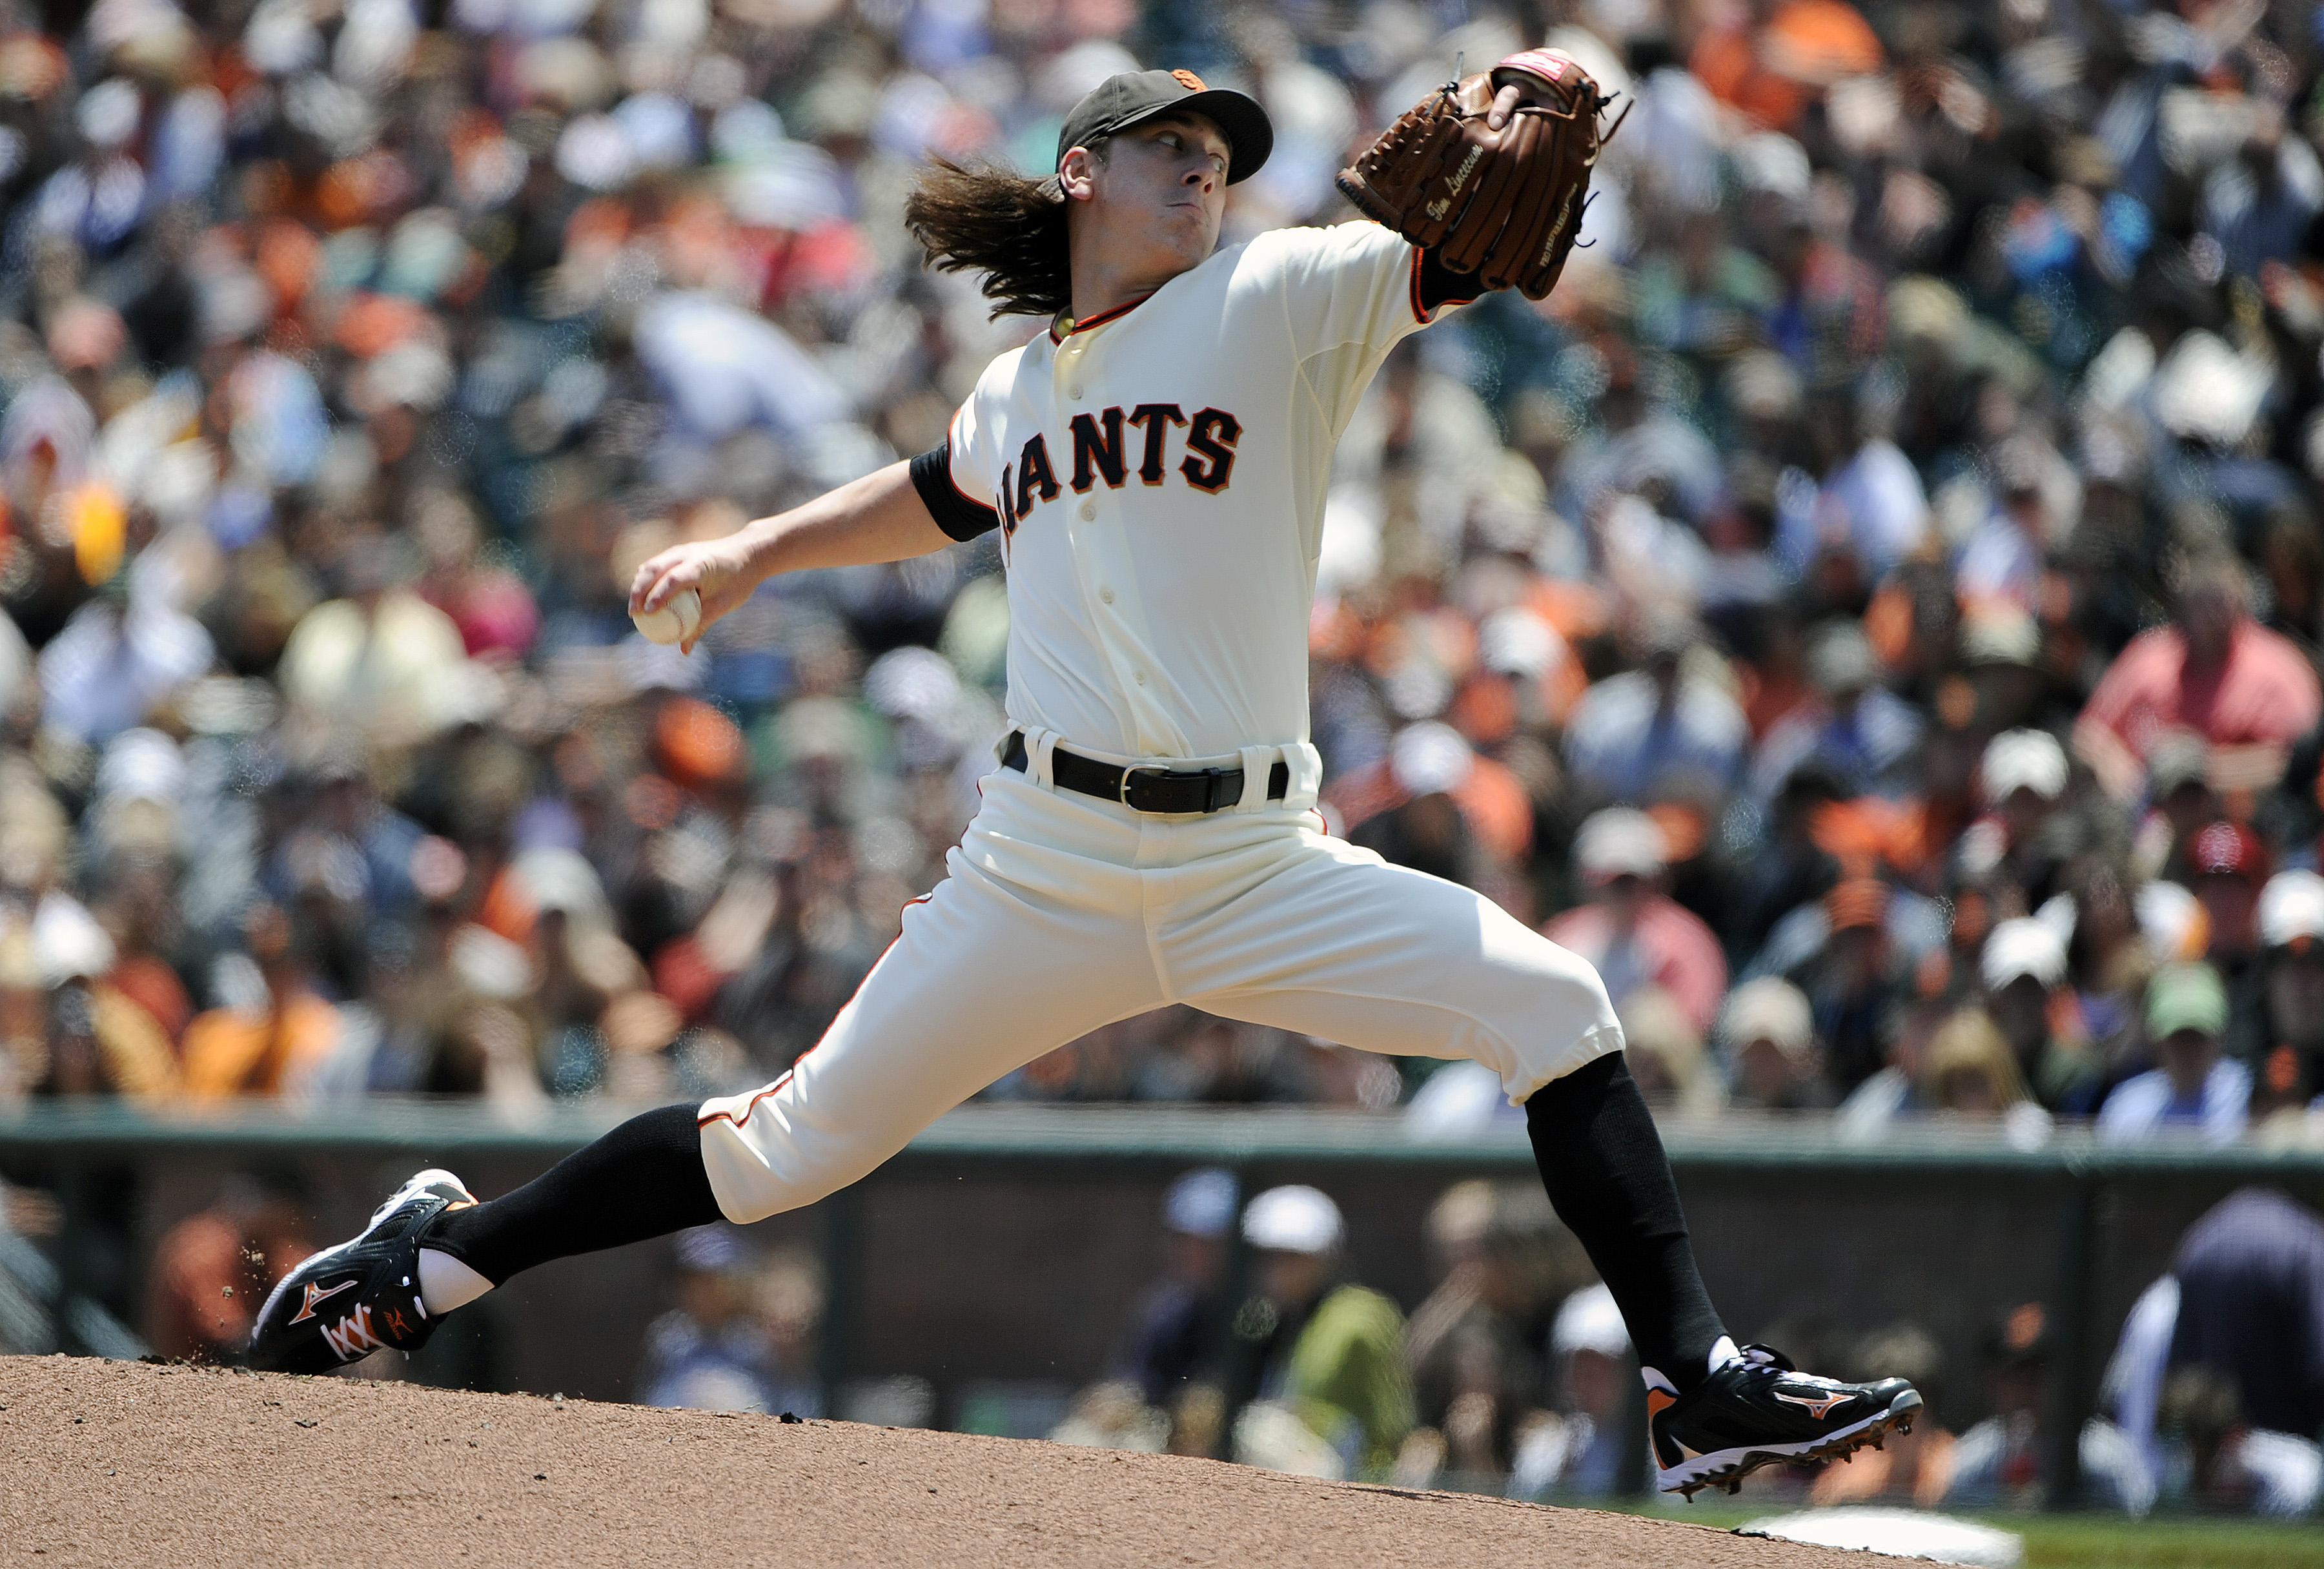 SAN FRANCISCO, CA - JUNE 11: Tim Lincecum #55 of the San Francisco Giants pitches against the Cincinnati Reds in the first inning during a MLB baseball game June 11, 2011 at AT&T Park in San Francisco, California. (Photo by Thearon W. Henderson/Getty Imag